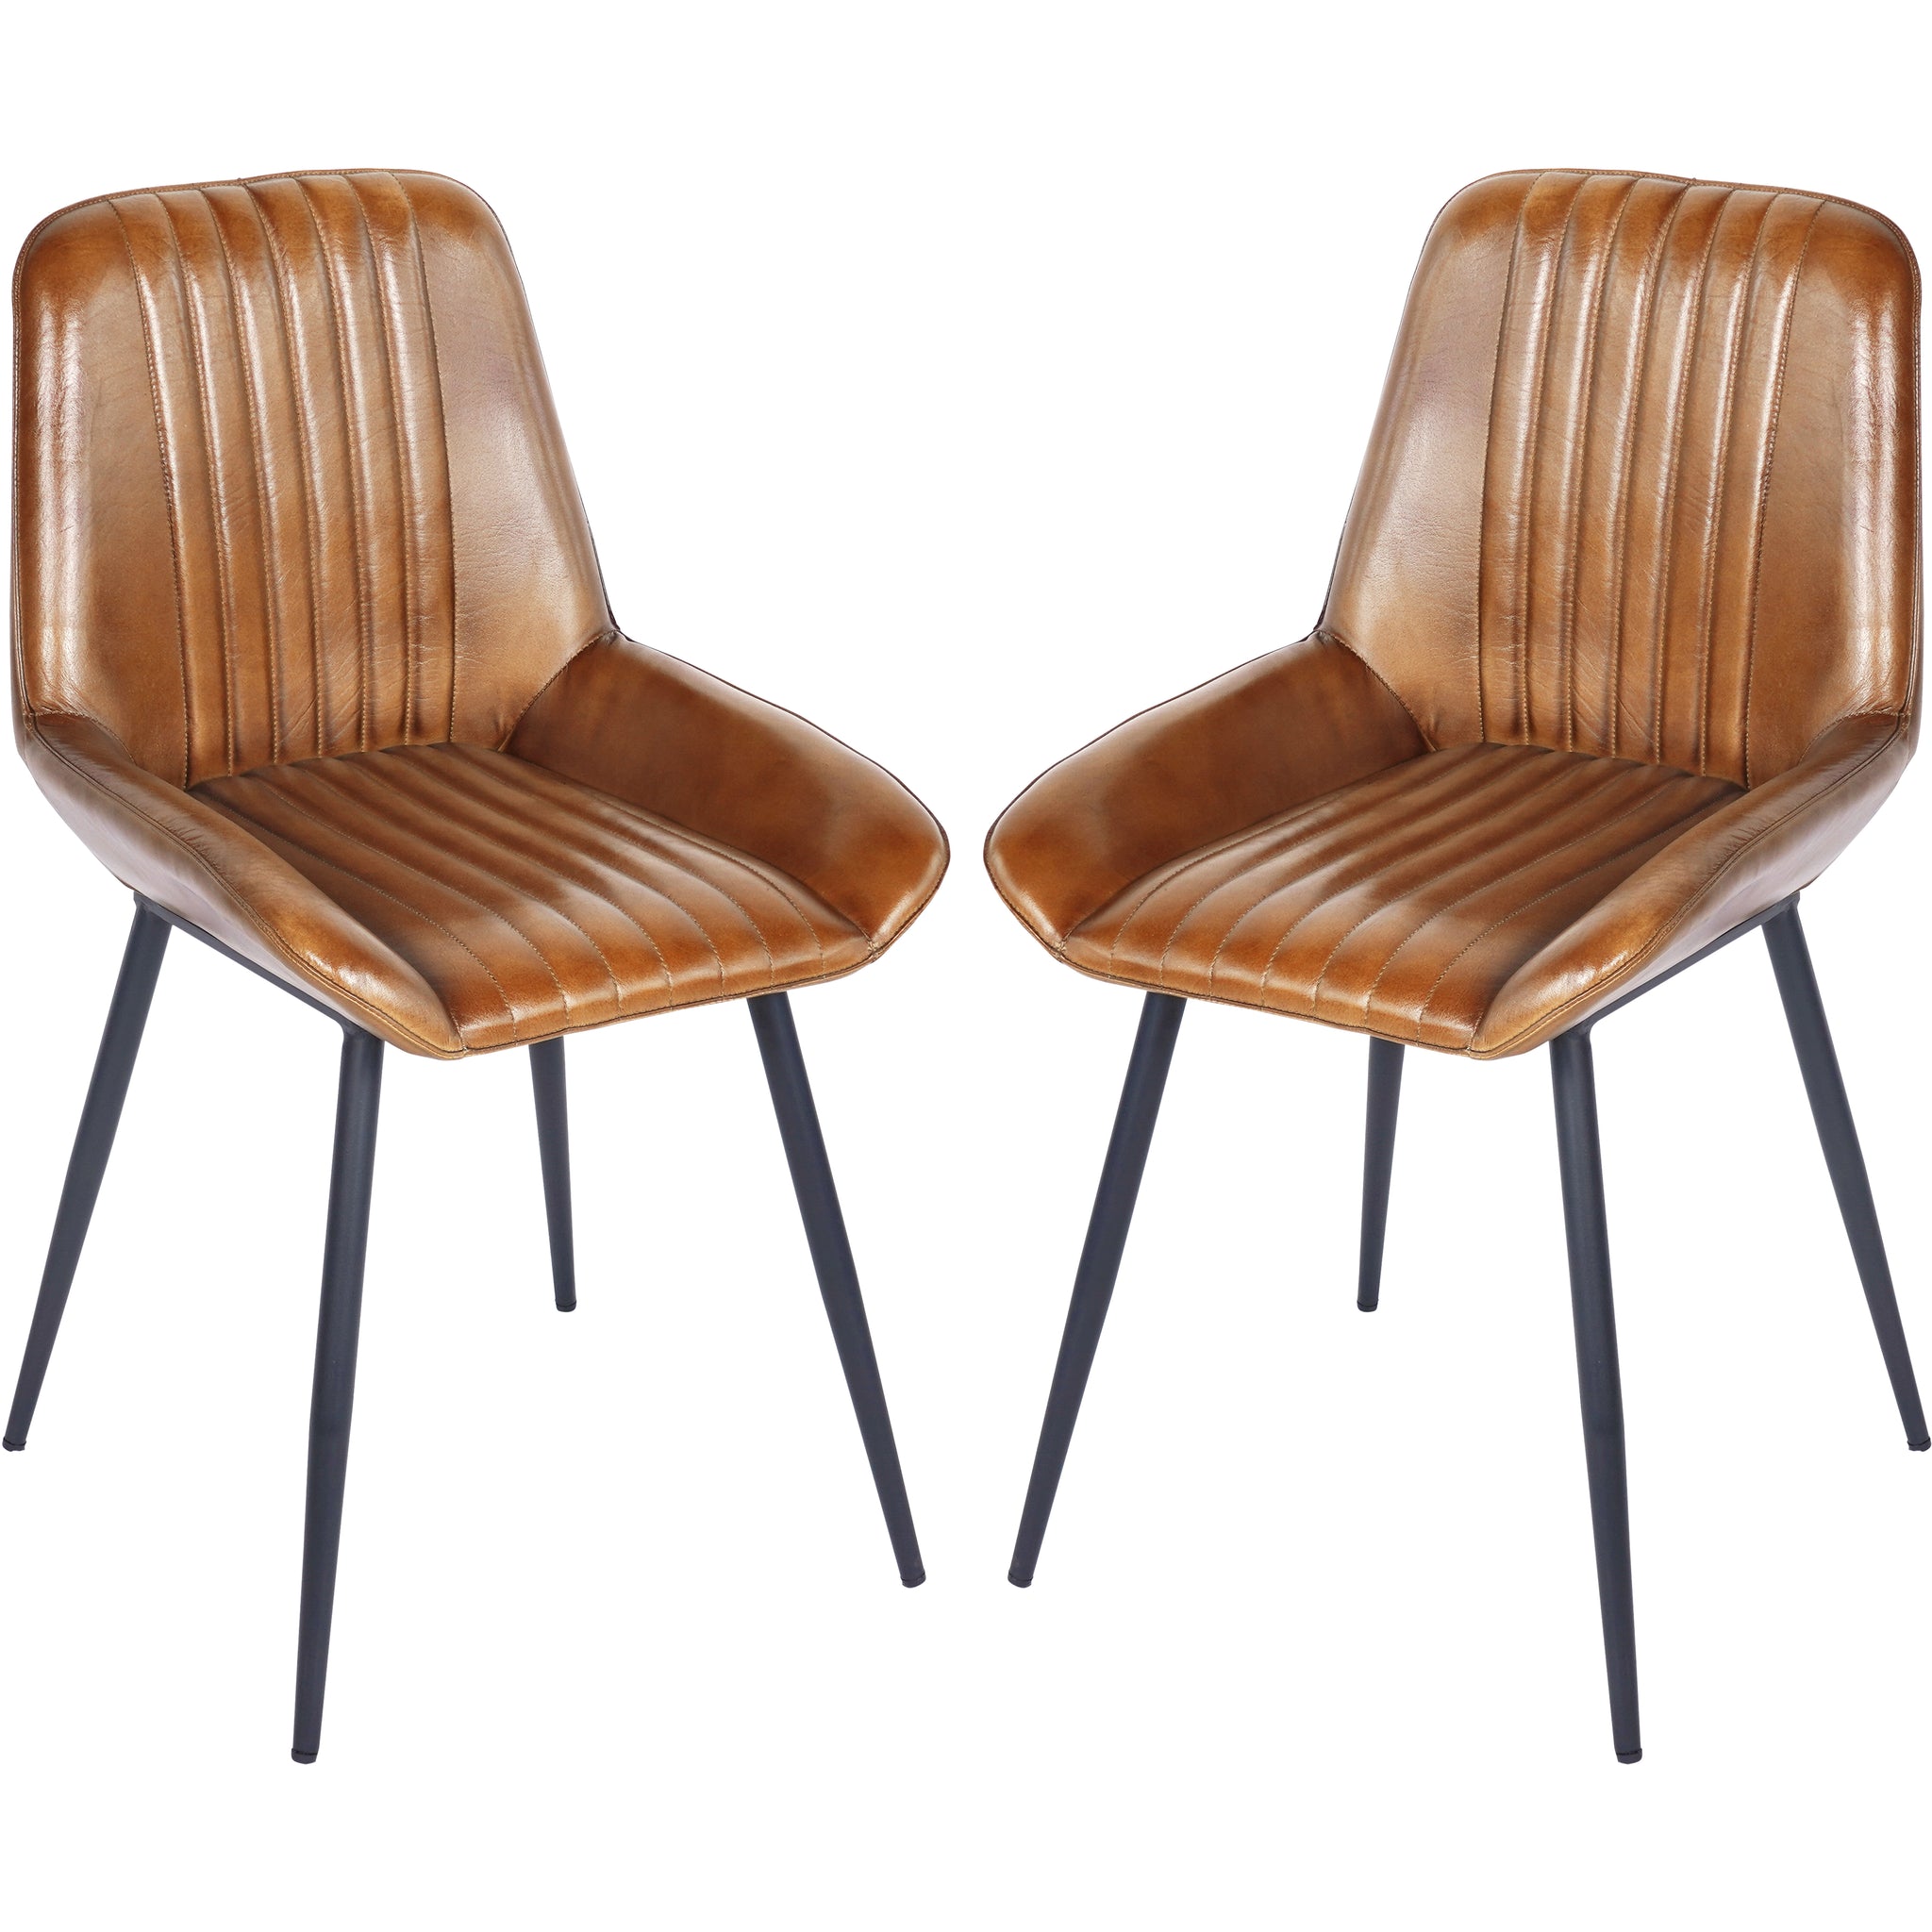 Set of 2 Boston Leather Dining Chairs in Cognac